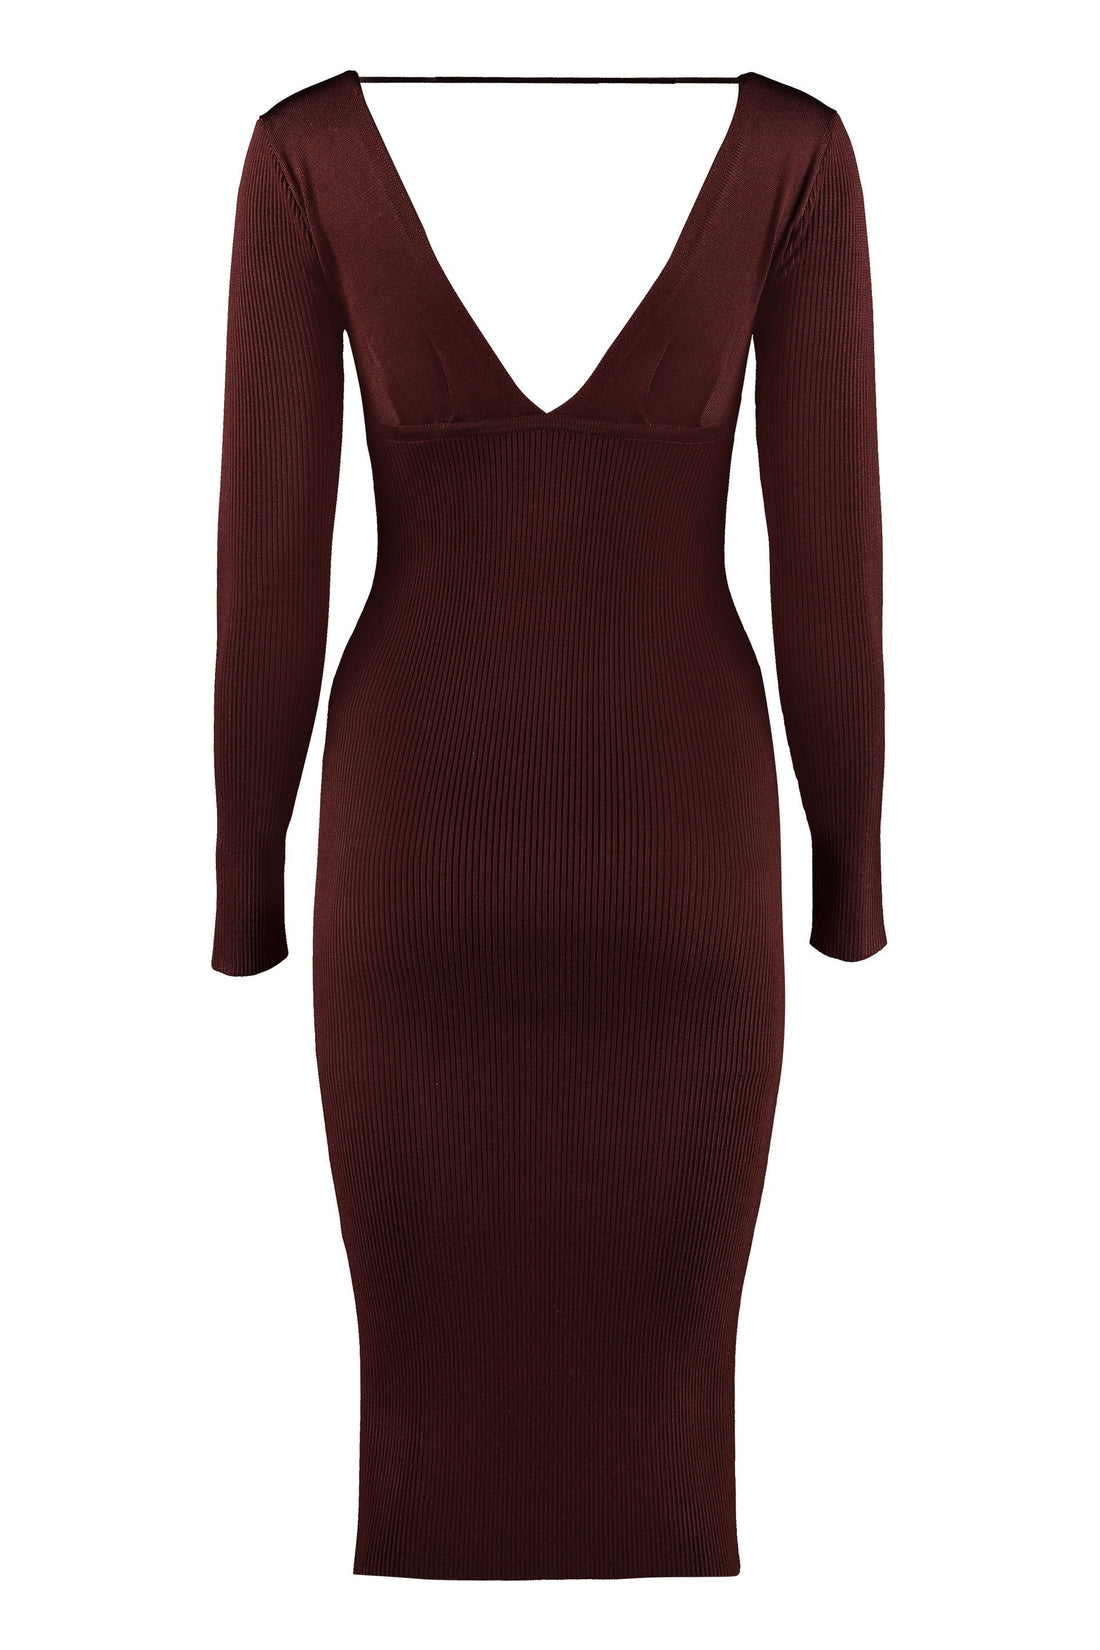 Pinko-OUTLET-SALE-Quasi ribbed knit dress-ARCHIVIST